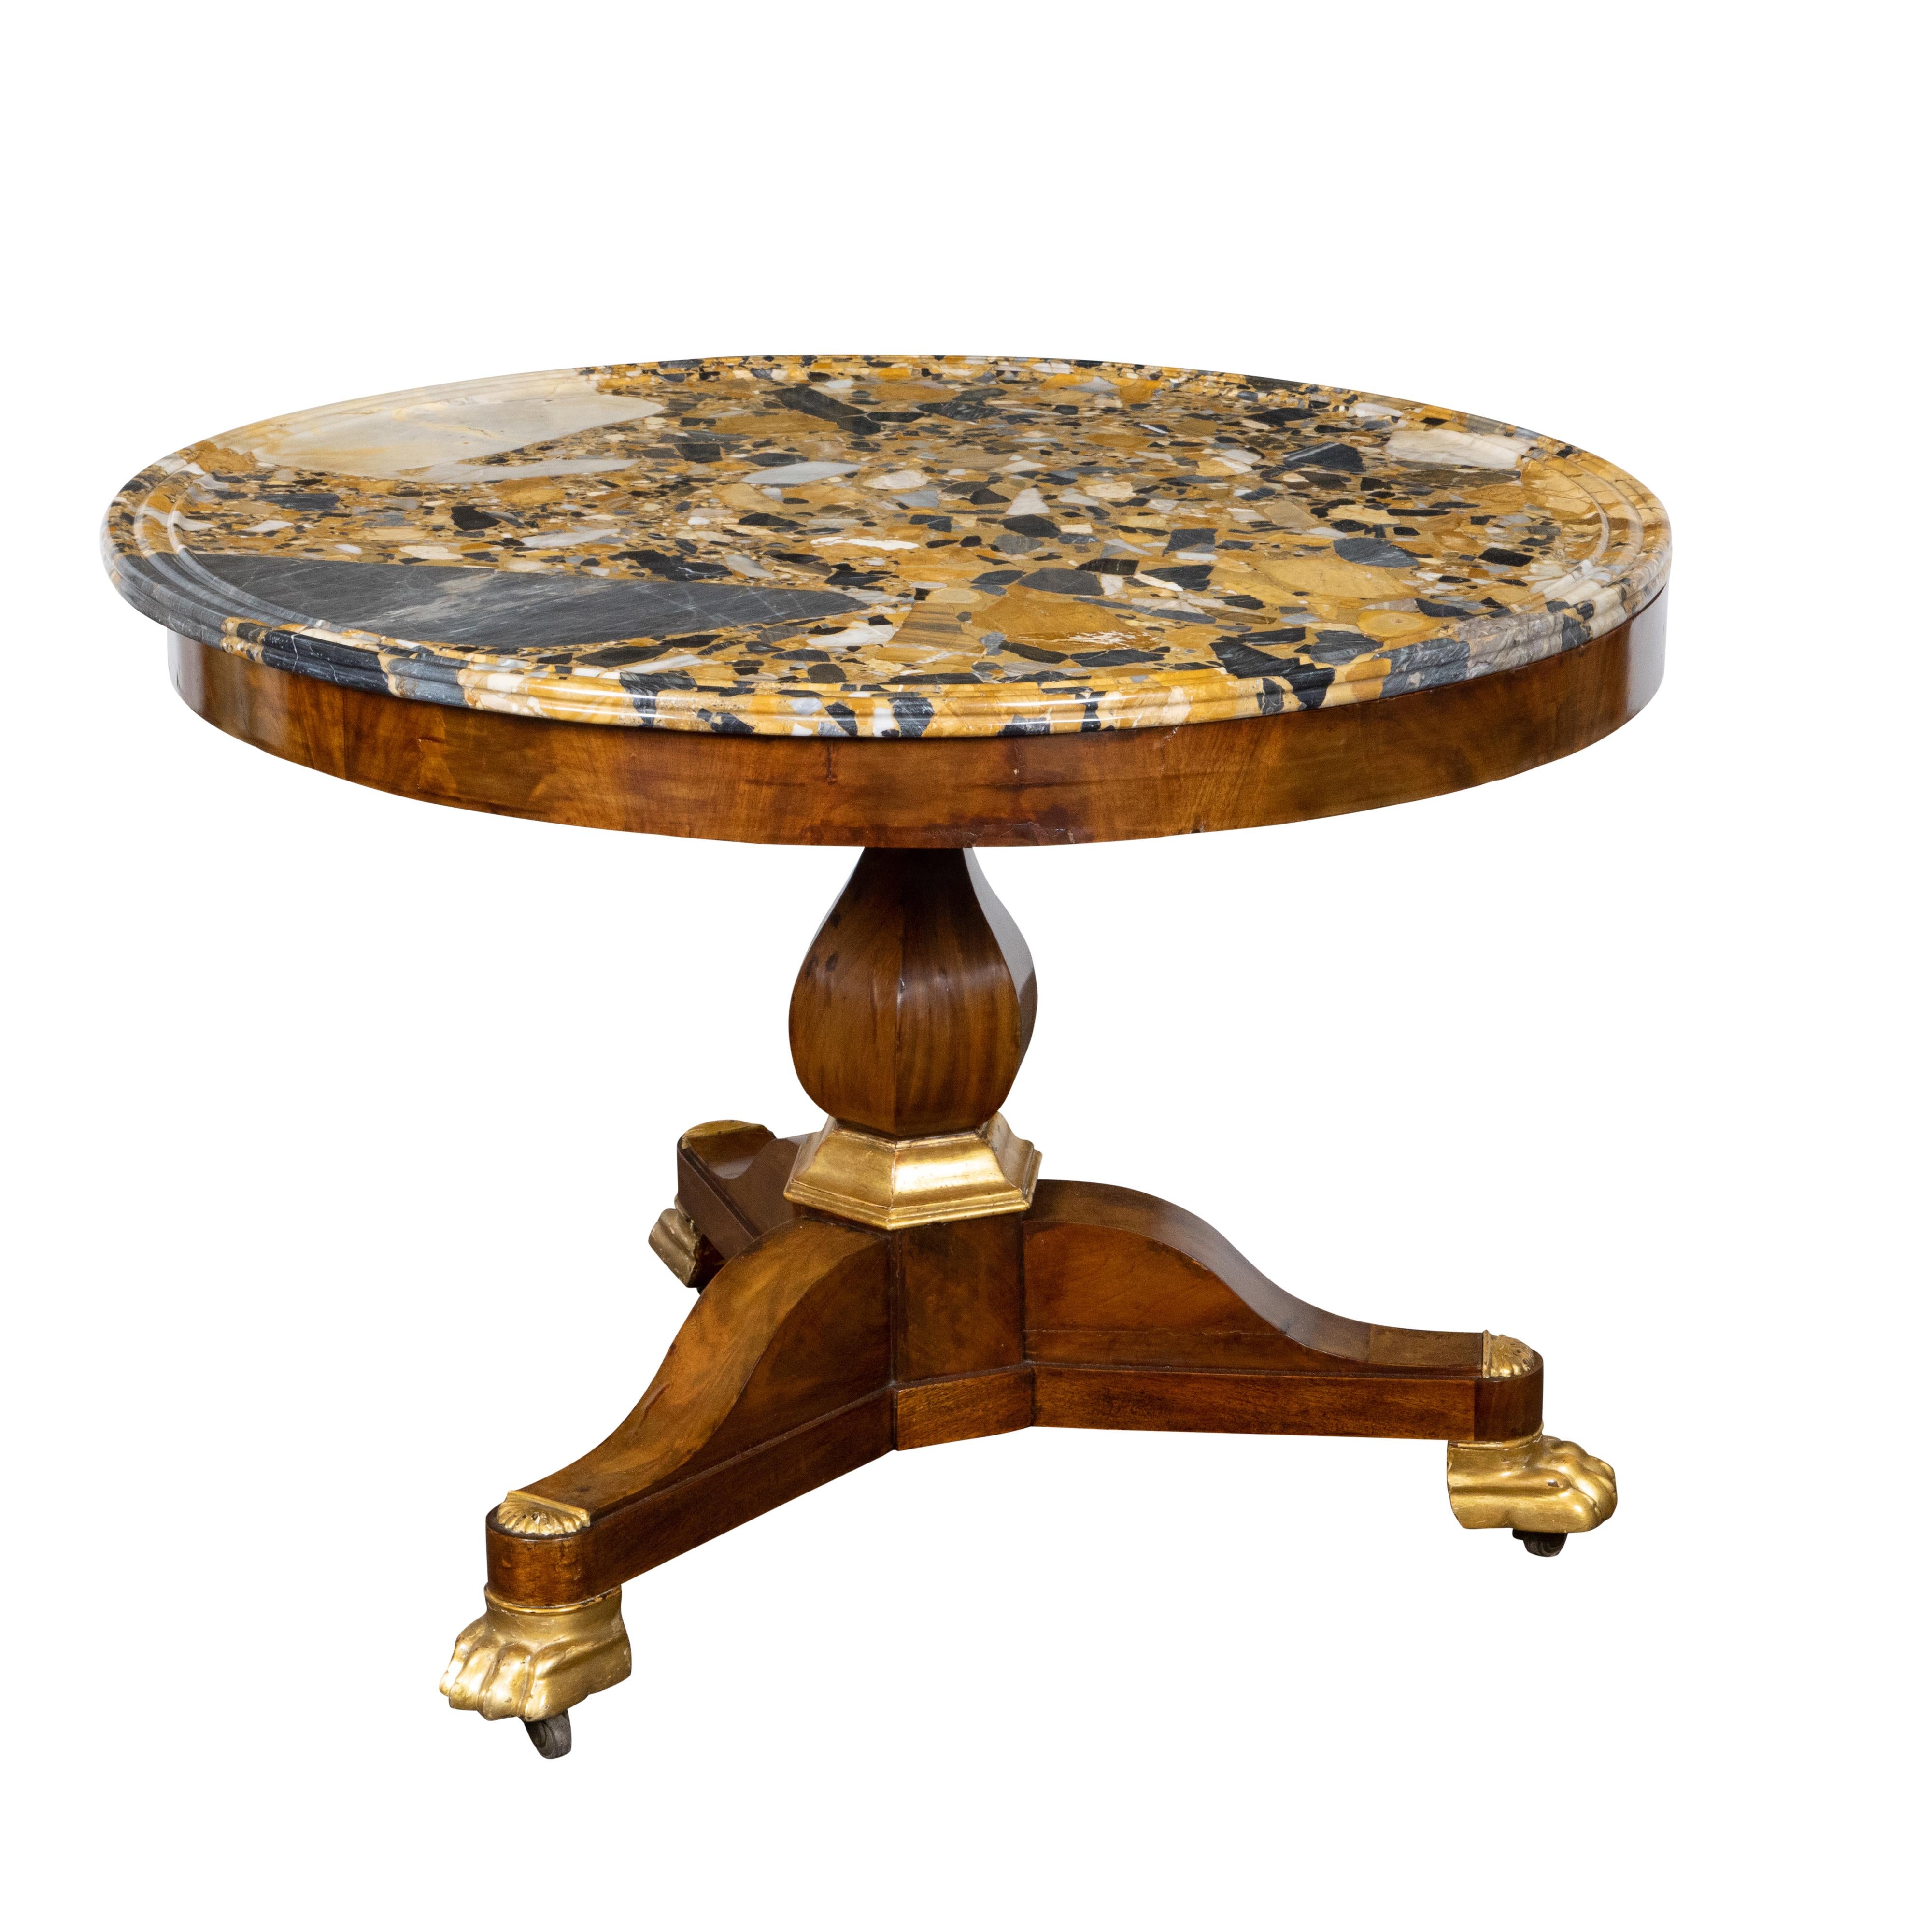 A French Napoléon III period mahogany center table from the mid 19th century with colorful marble top, pedestal base and carved giltwood lion paw feet on casters. Created in France during the reign of France's last Emperor Napoléon III, this